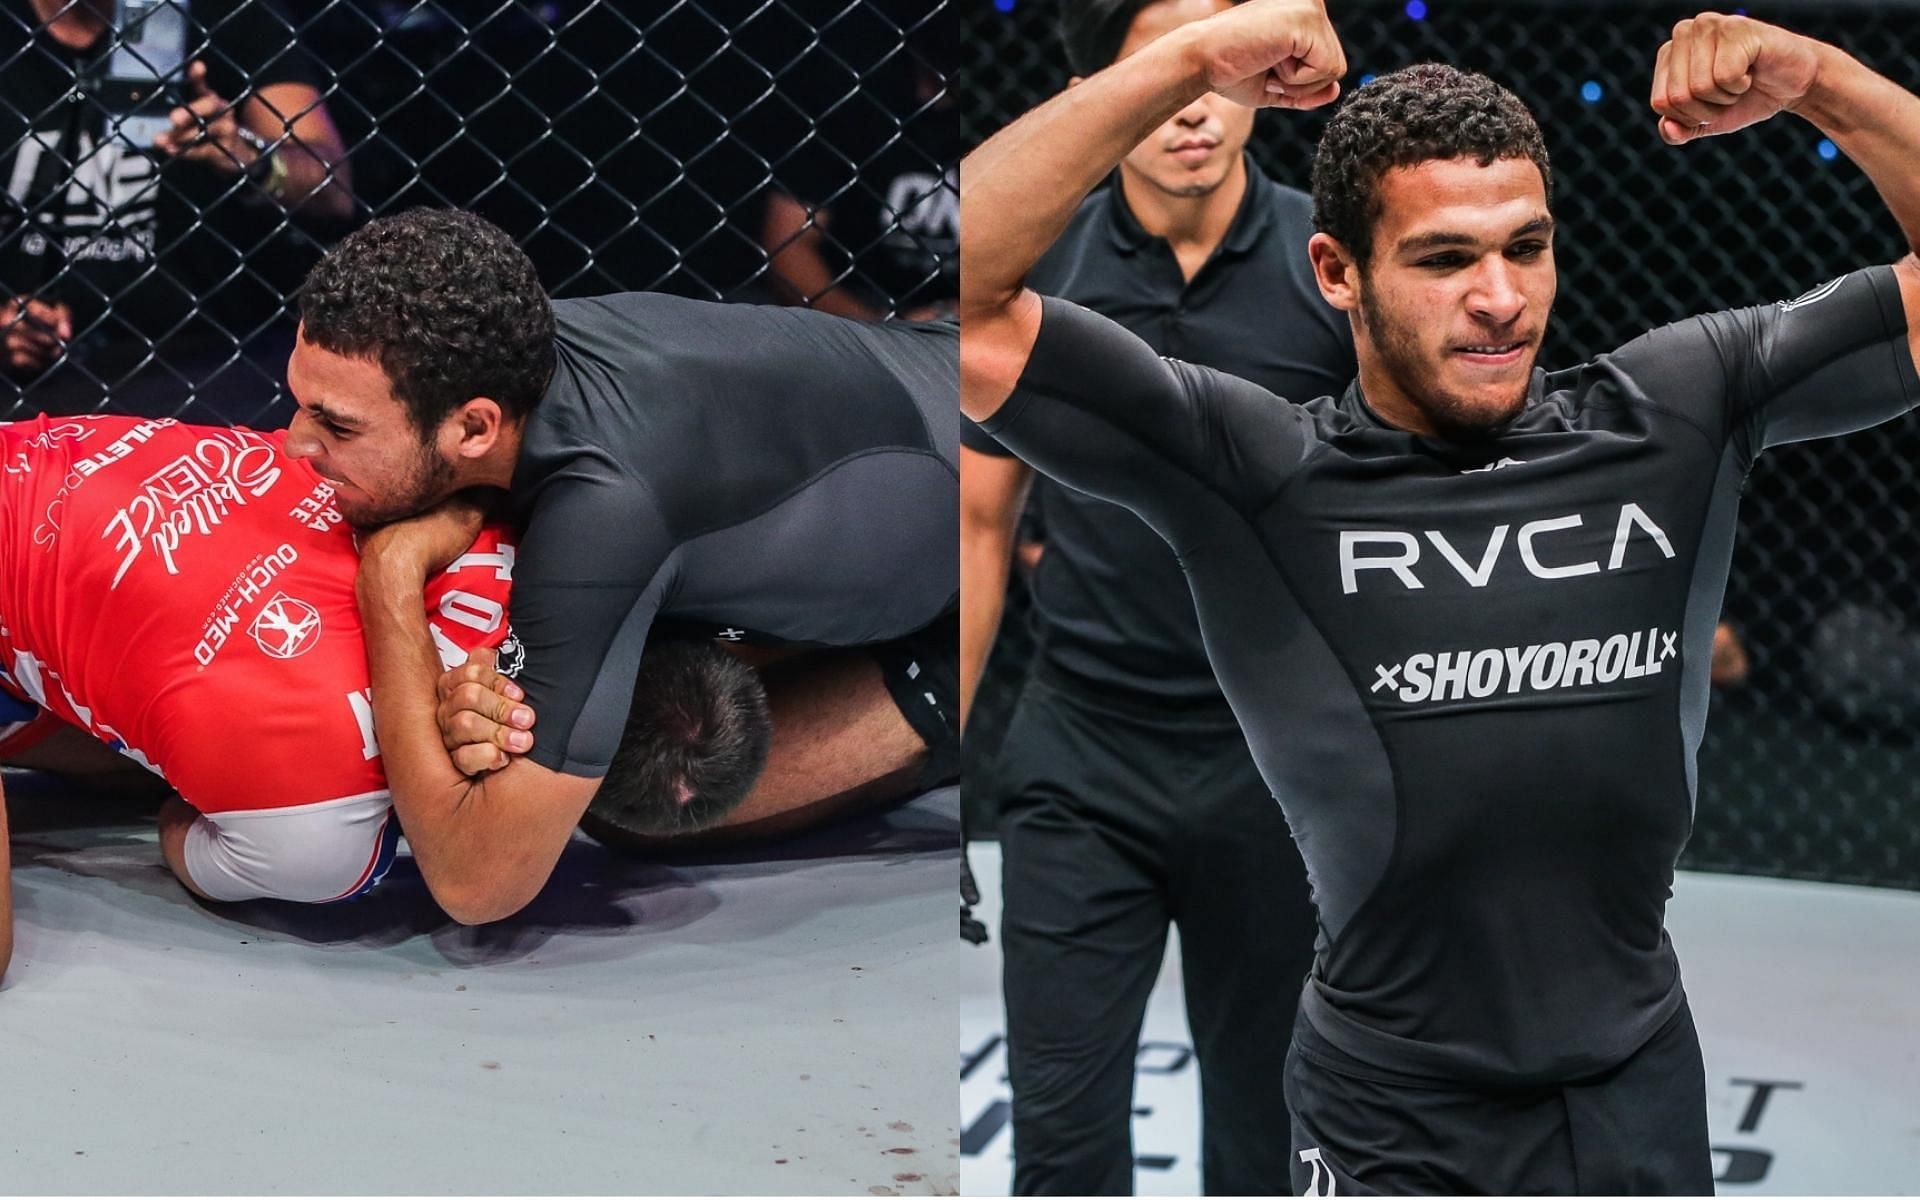 Tye Ruotolo submits Garry Tonon at ONE 157 [Images courtesy of ONE Championship]